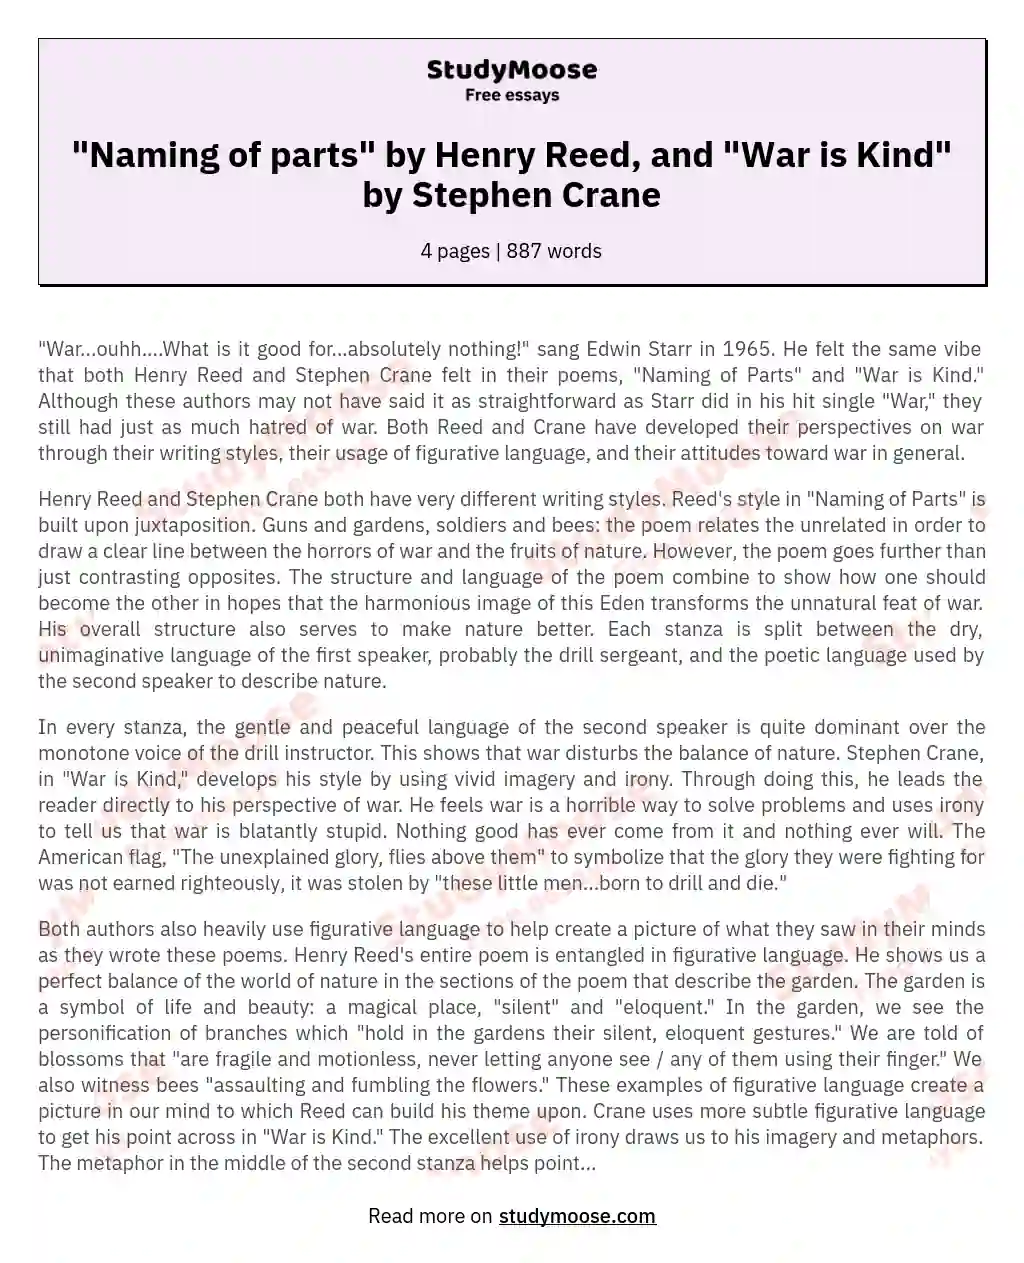 "Naming of parts" by Henry Reed, and "War is Kind" by Stephen Crane essay